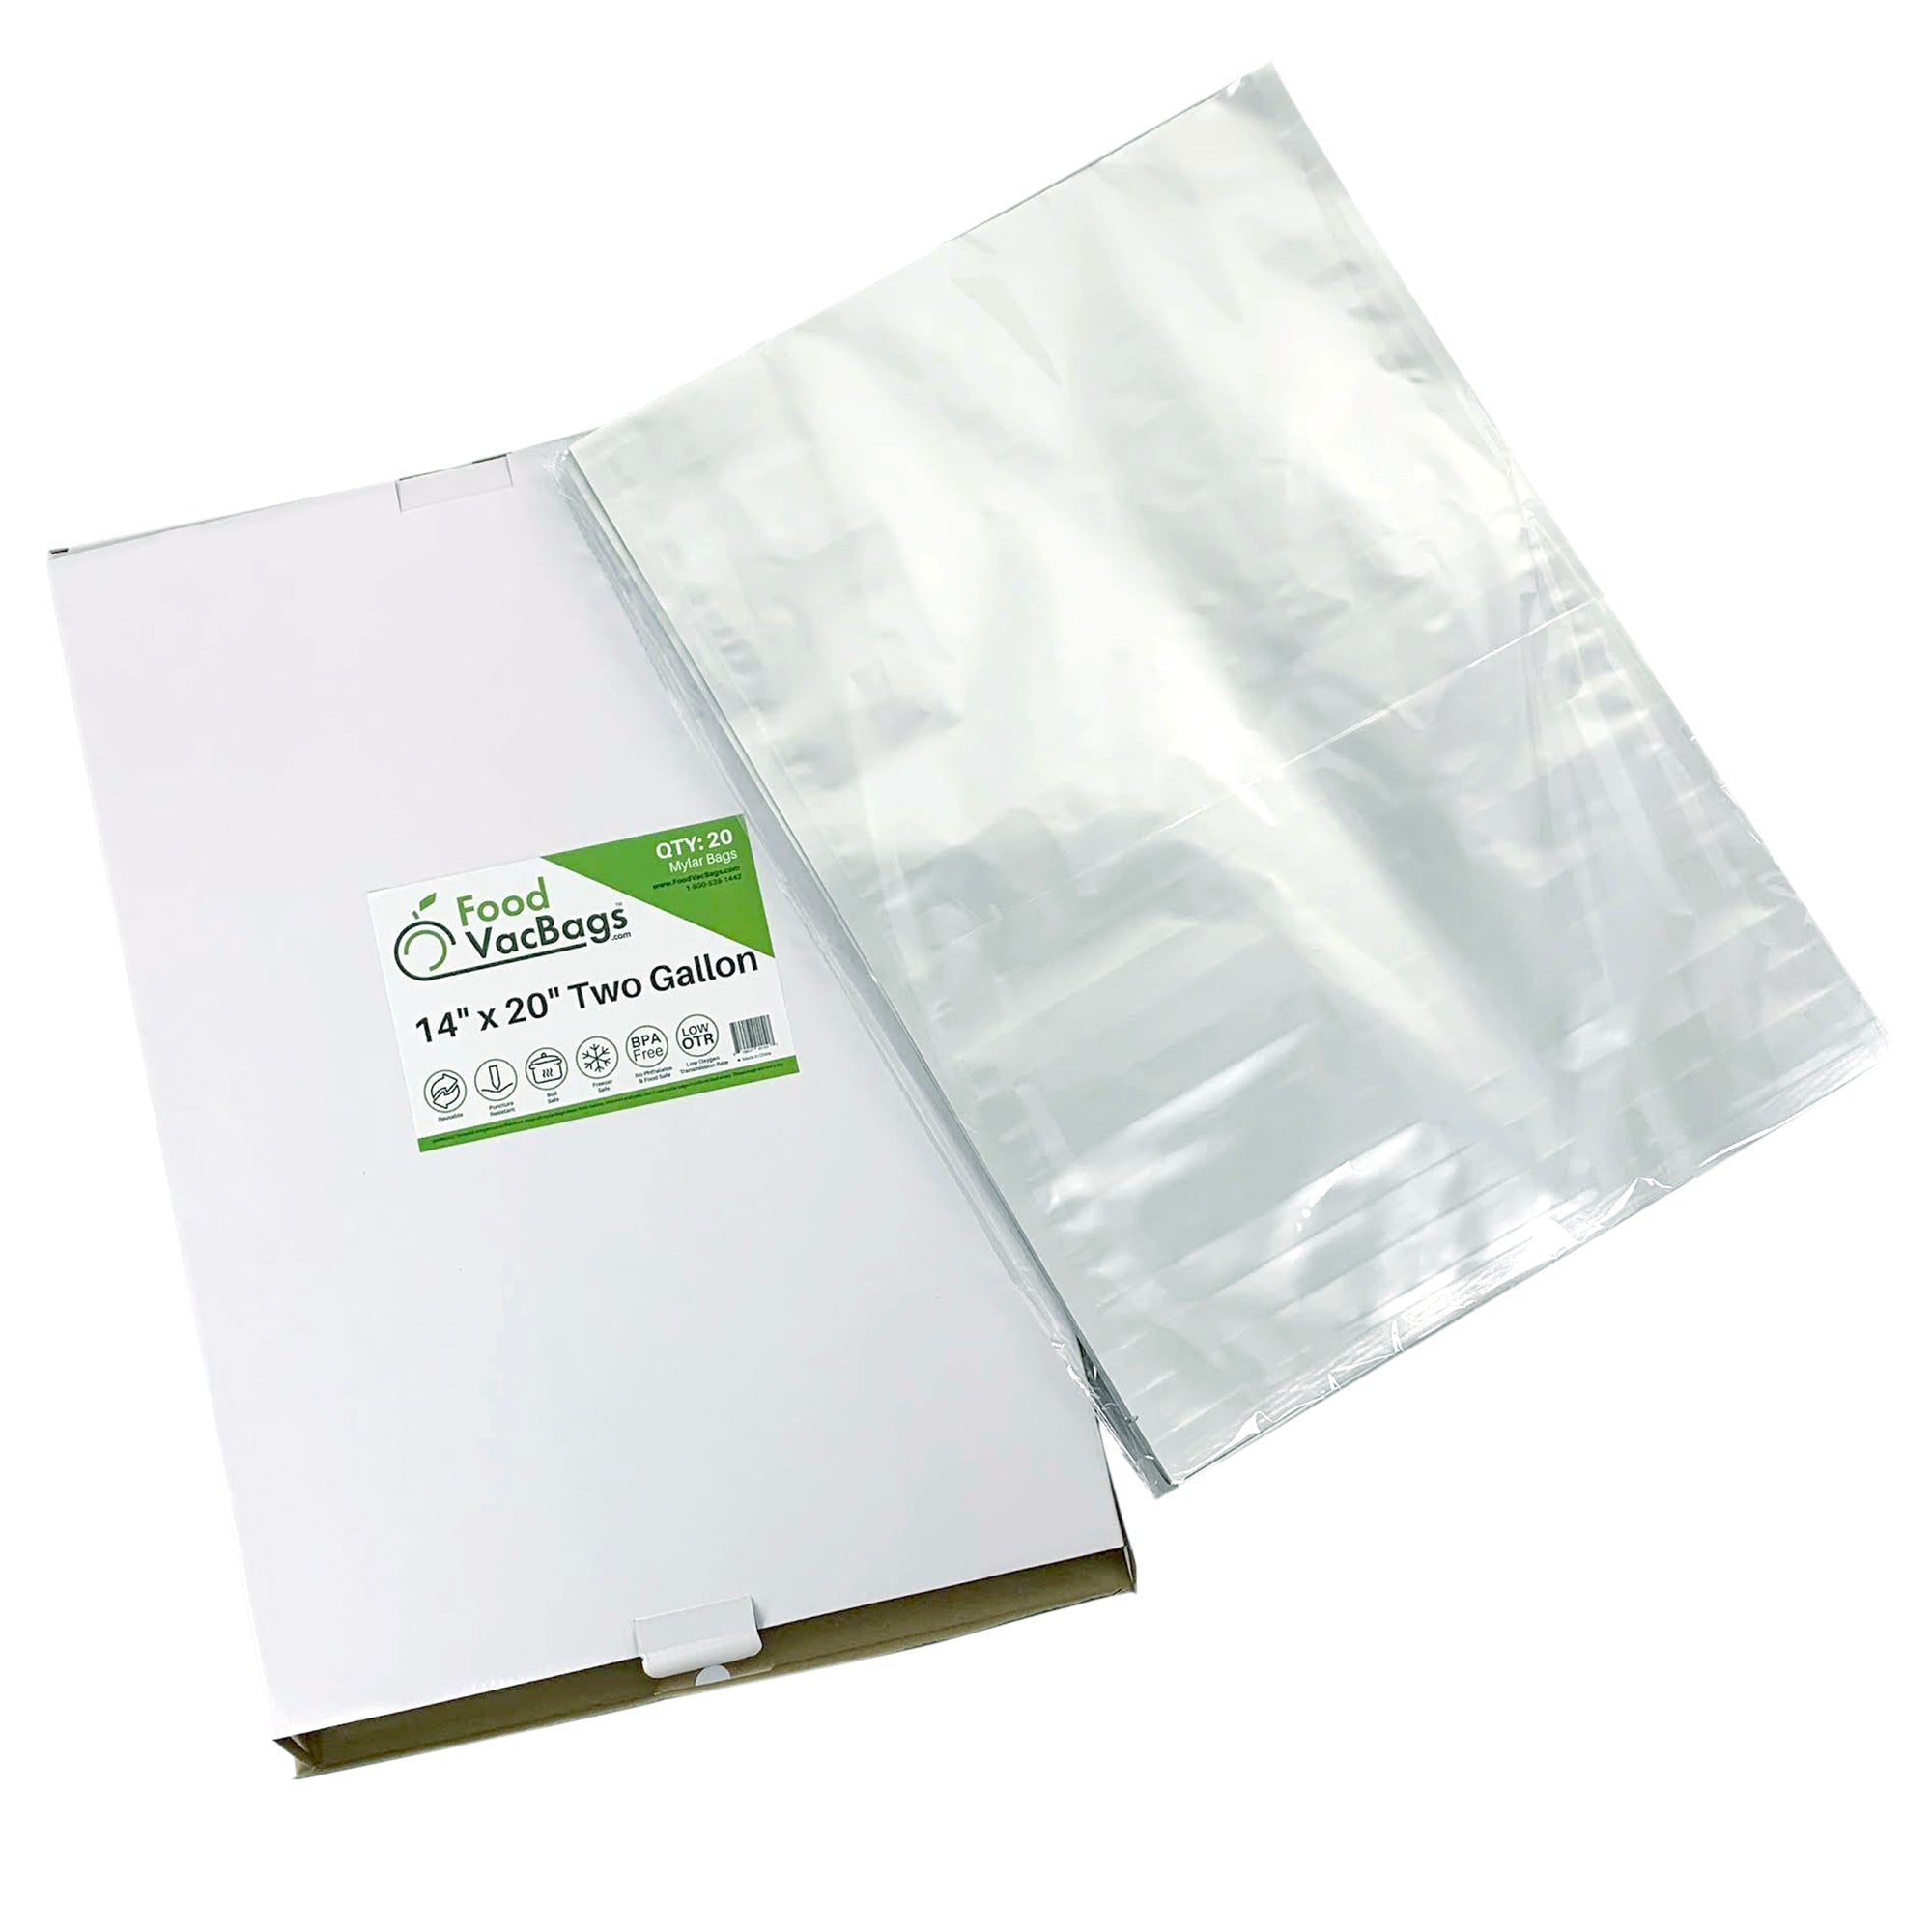 Quart Standard Mylar Storage Bags and Oxygen Absorbers